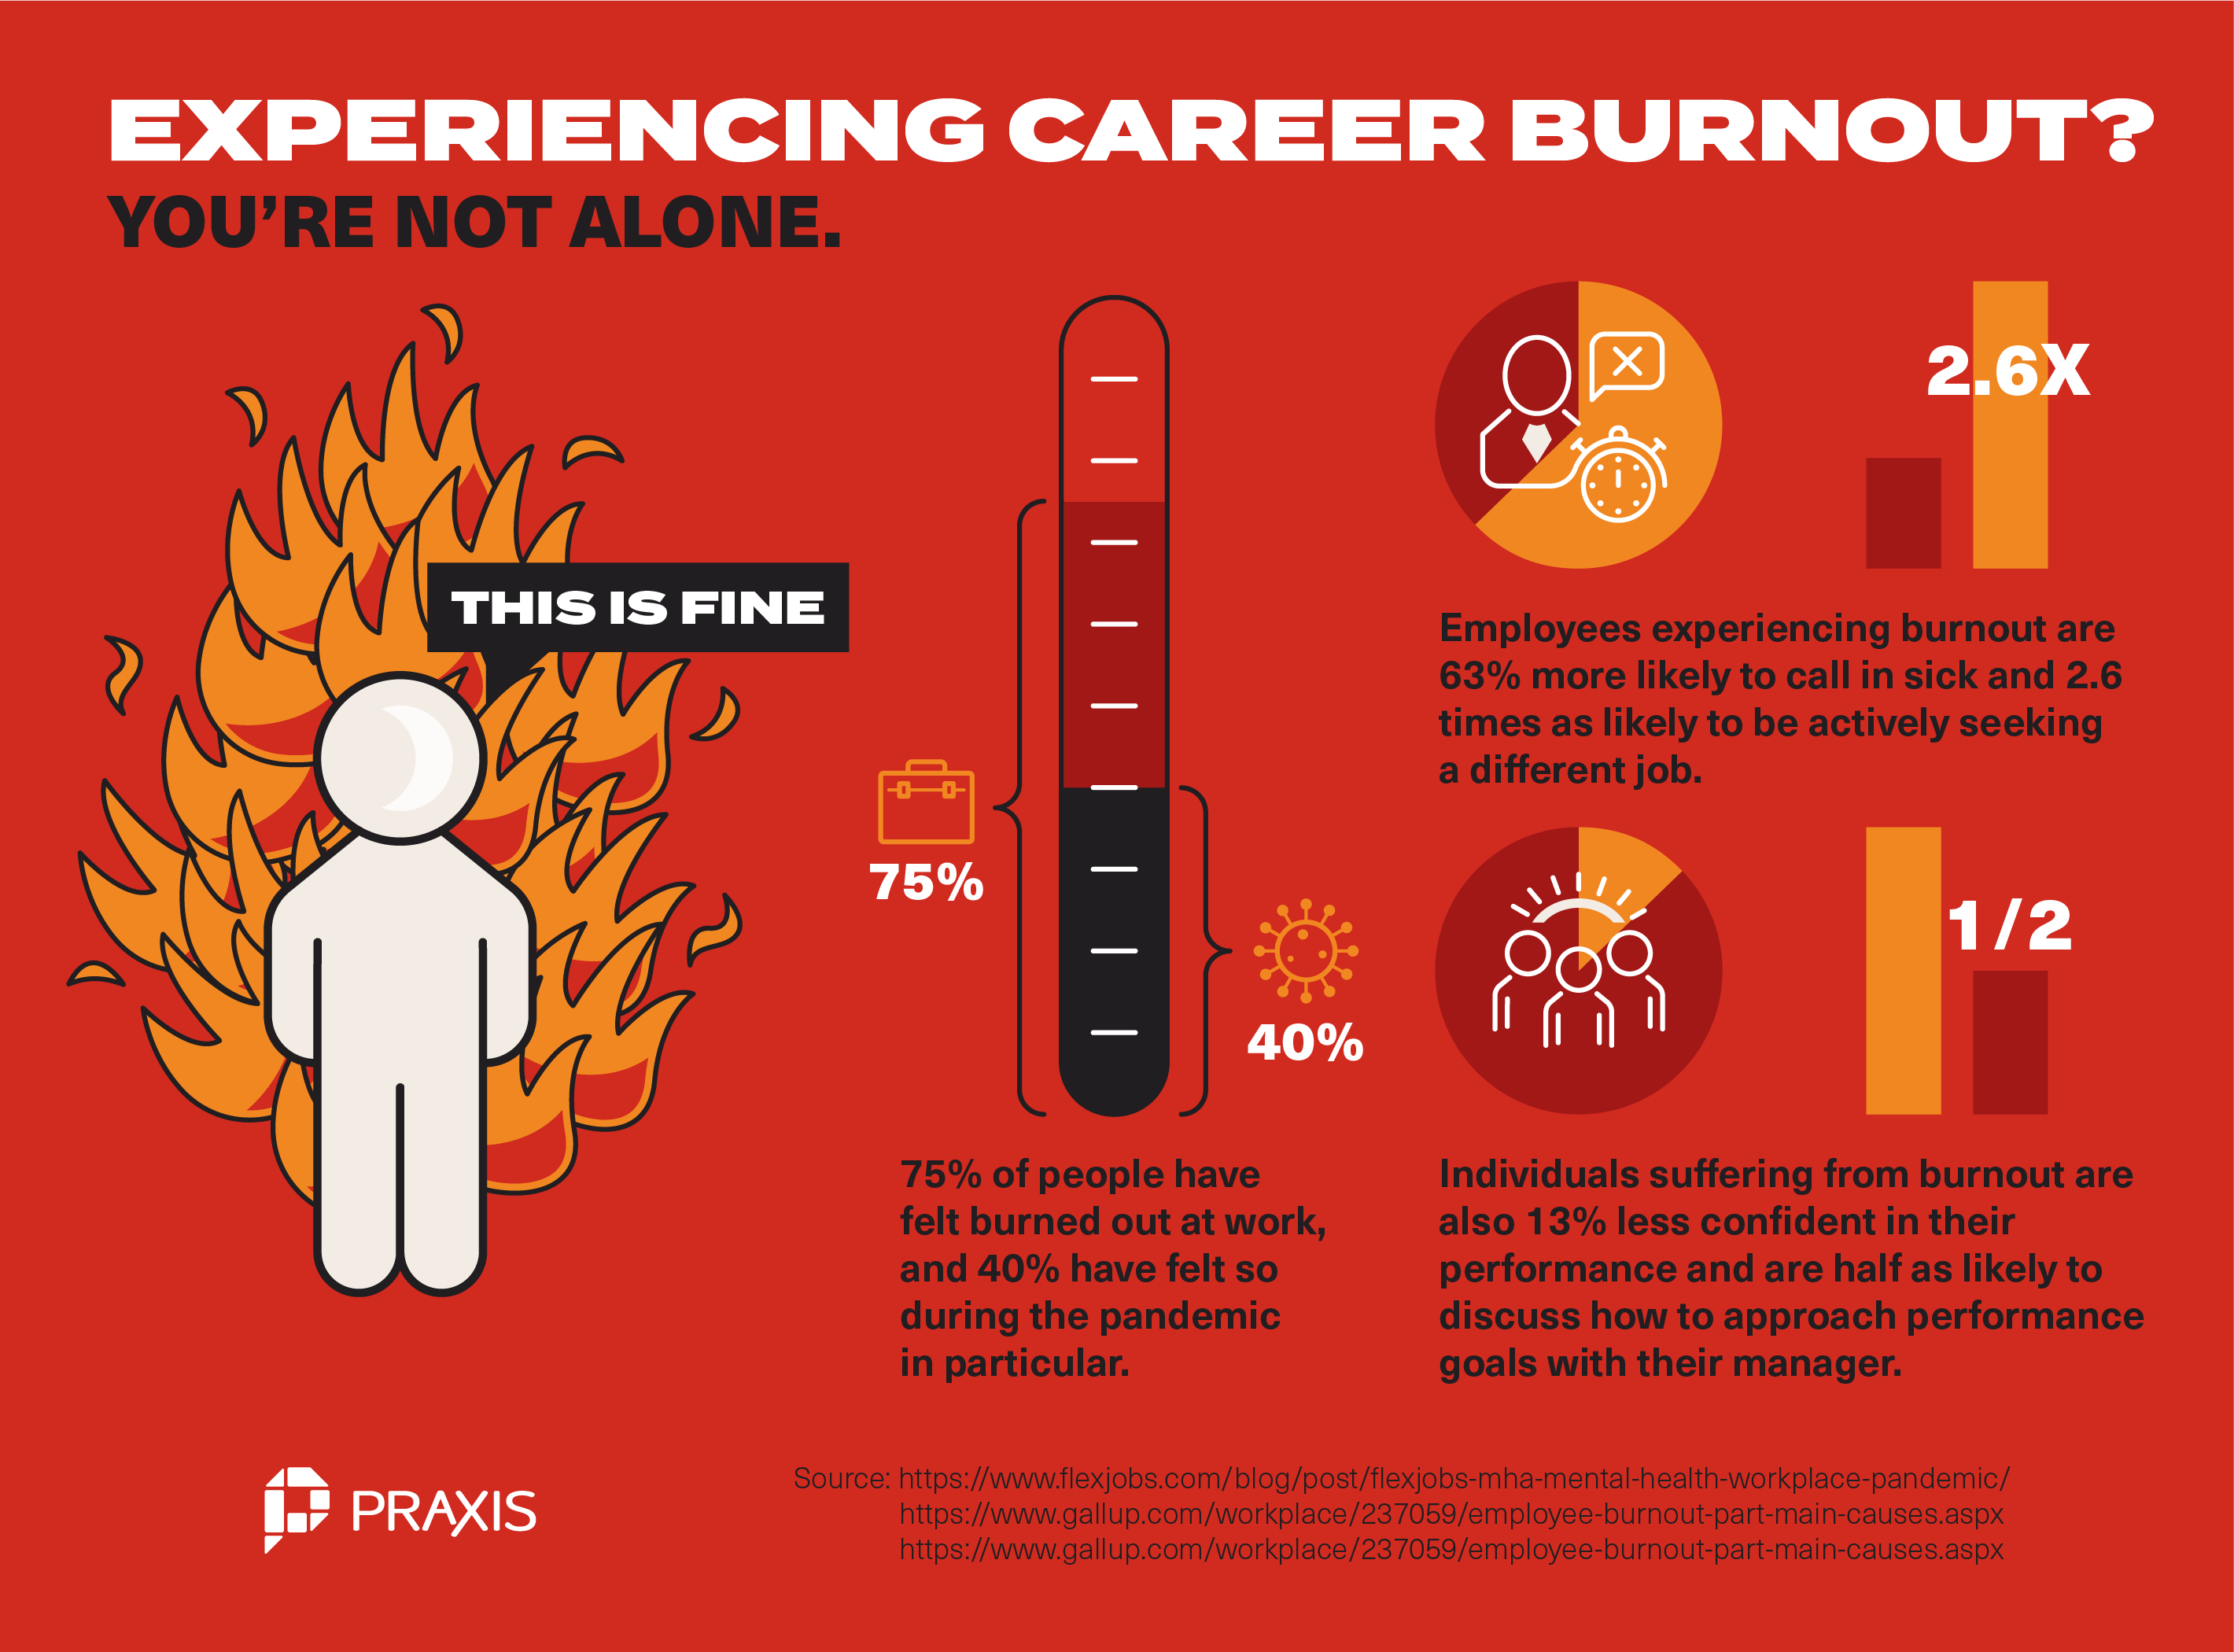 experiencing a career burnout?